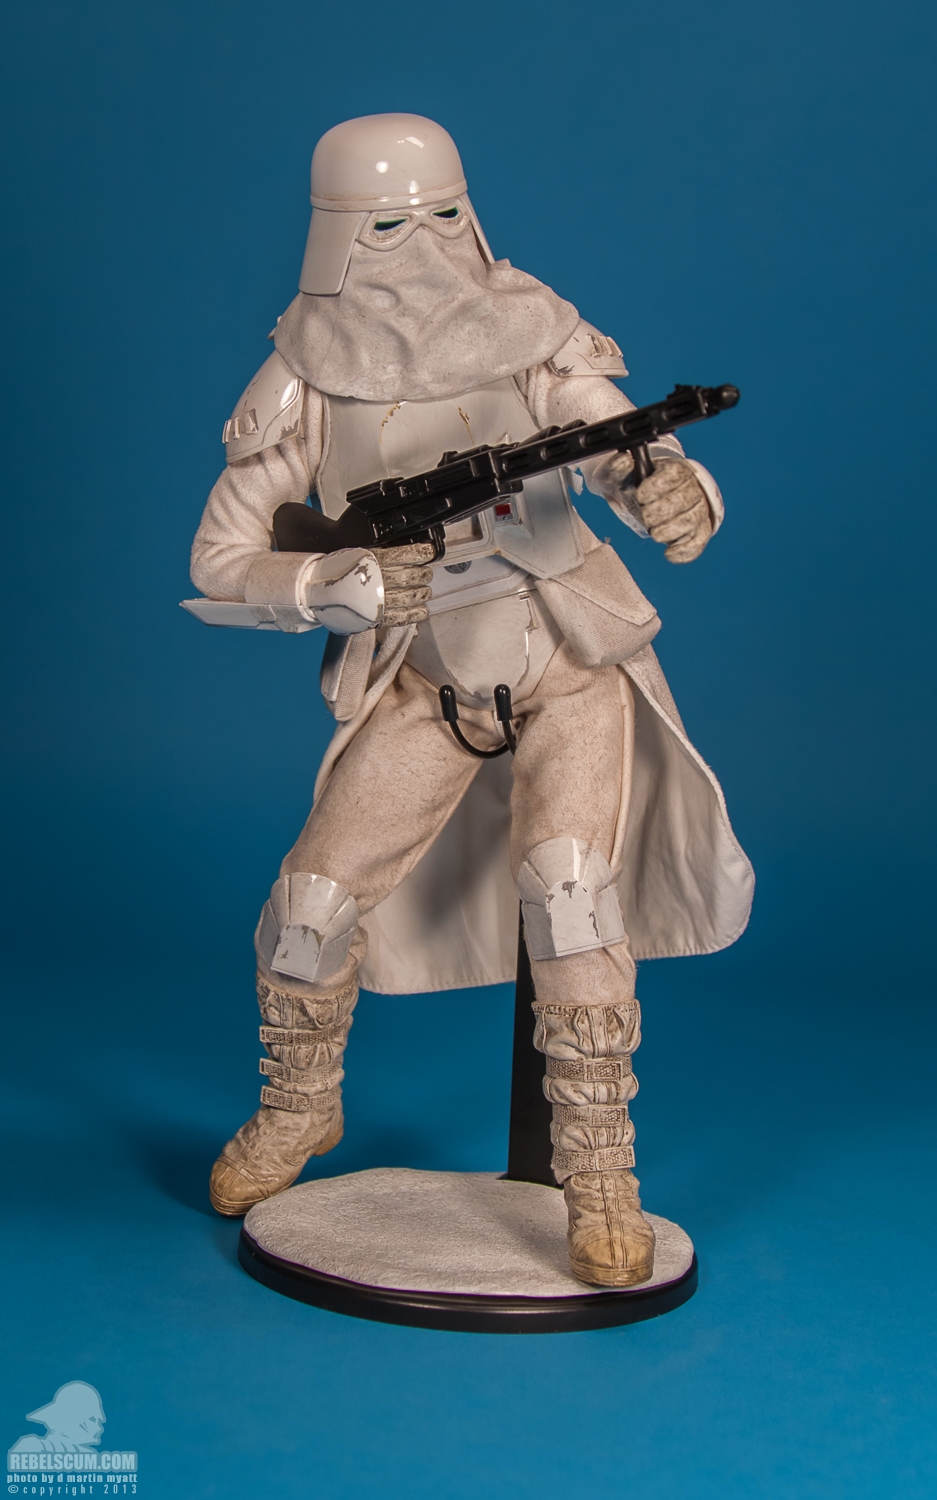 Snowtrooper_Militaries_Of_Star_Wars_Sideshow_Collectibles-14.jpg